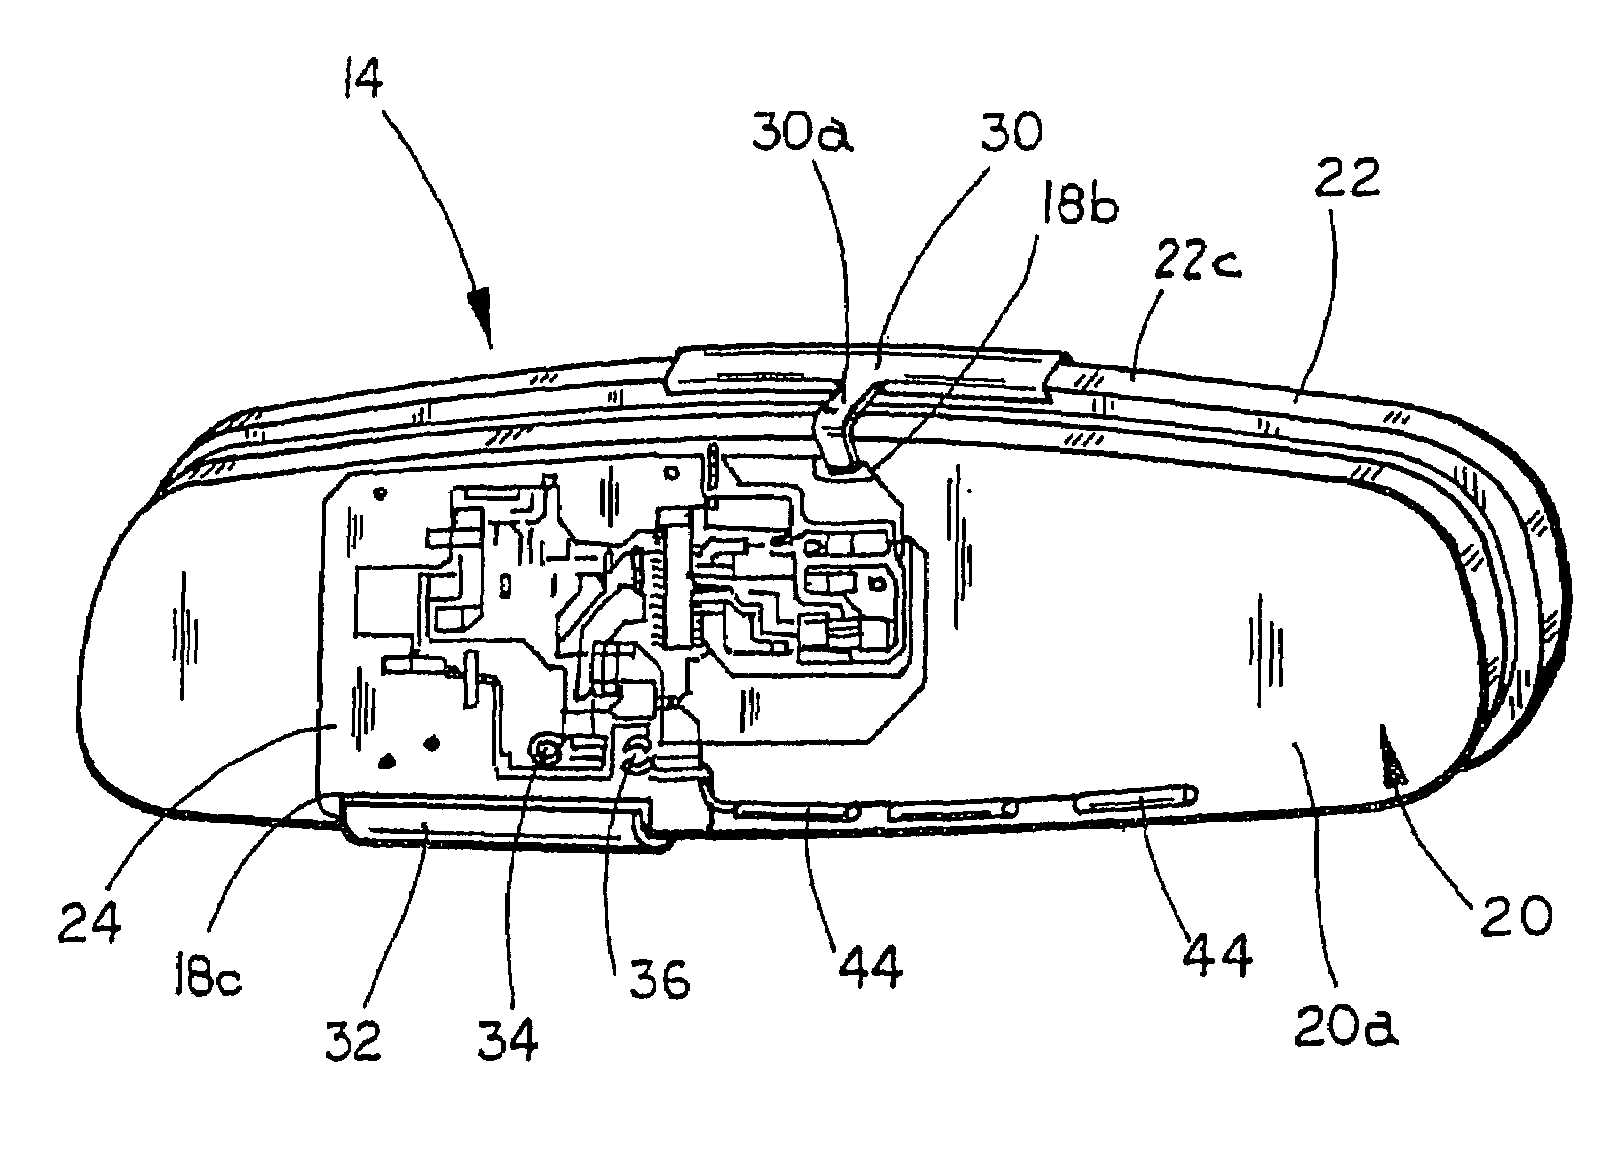 Mirror reflective element assembly including electronic component